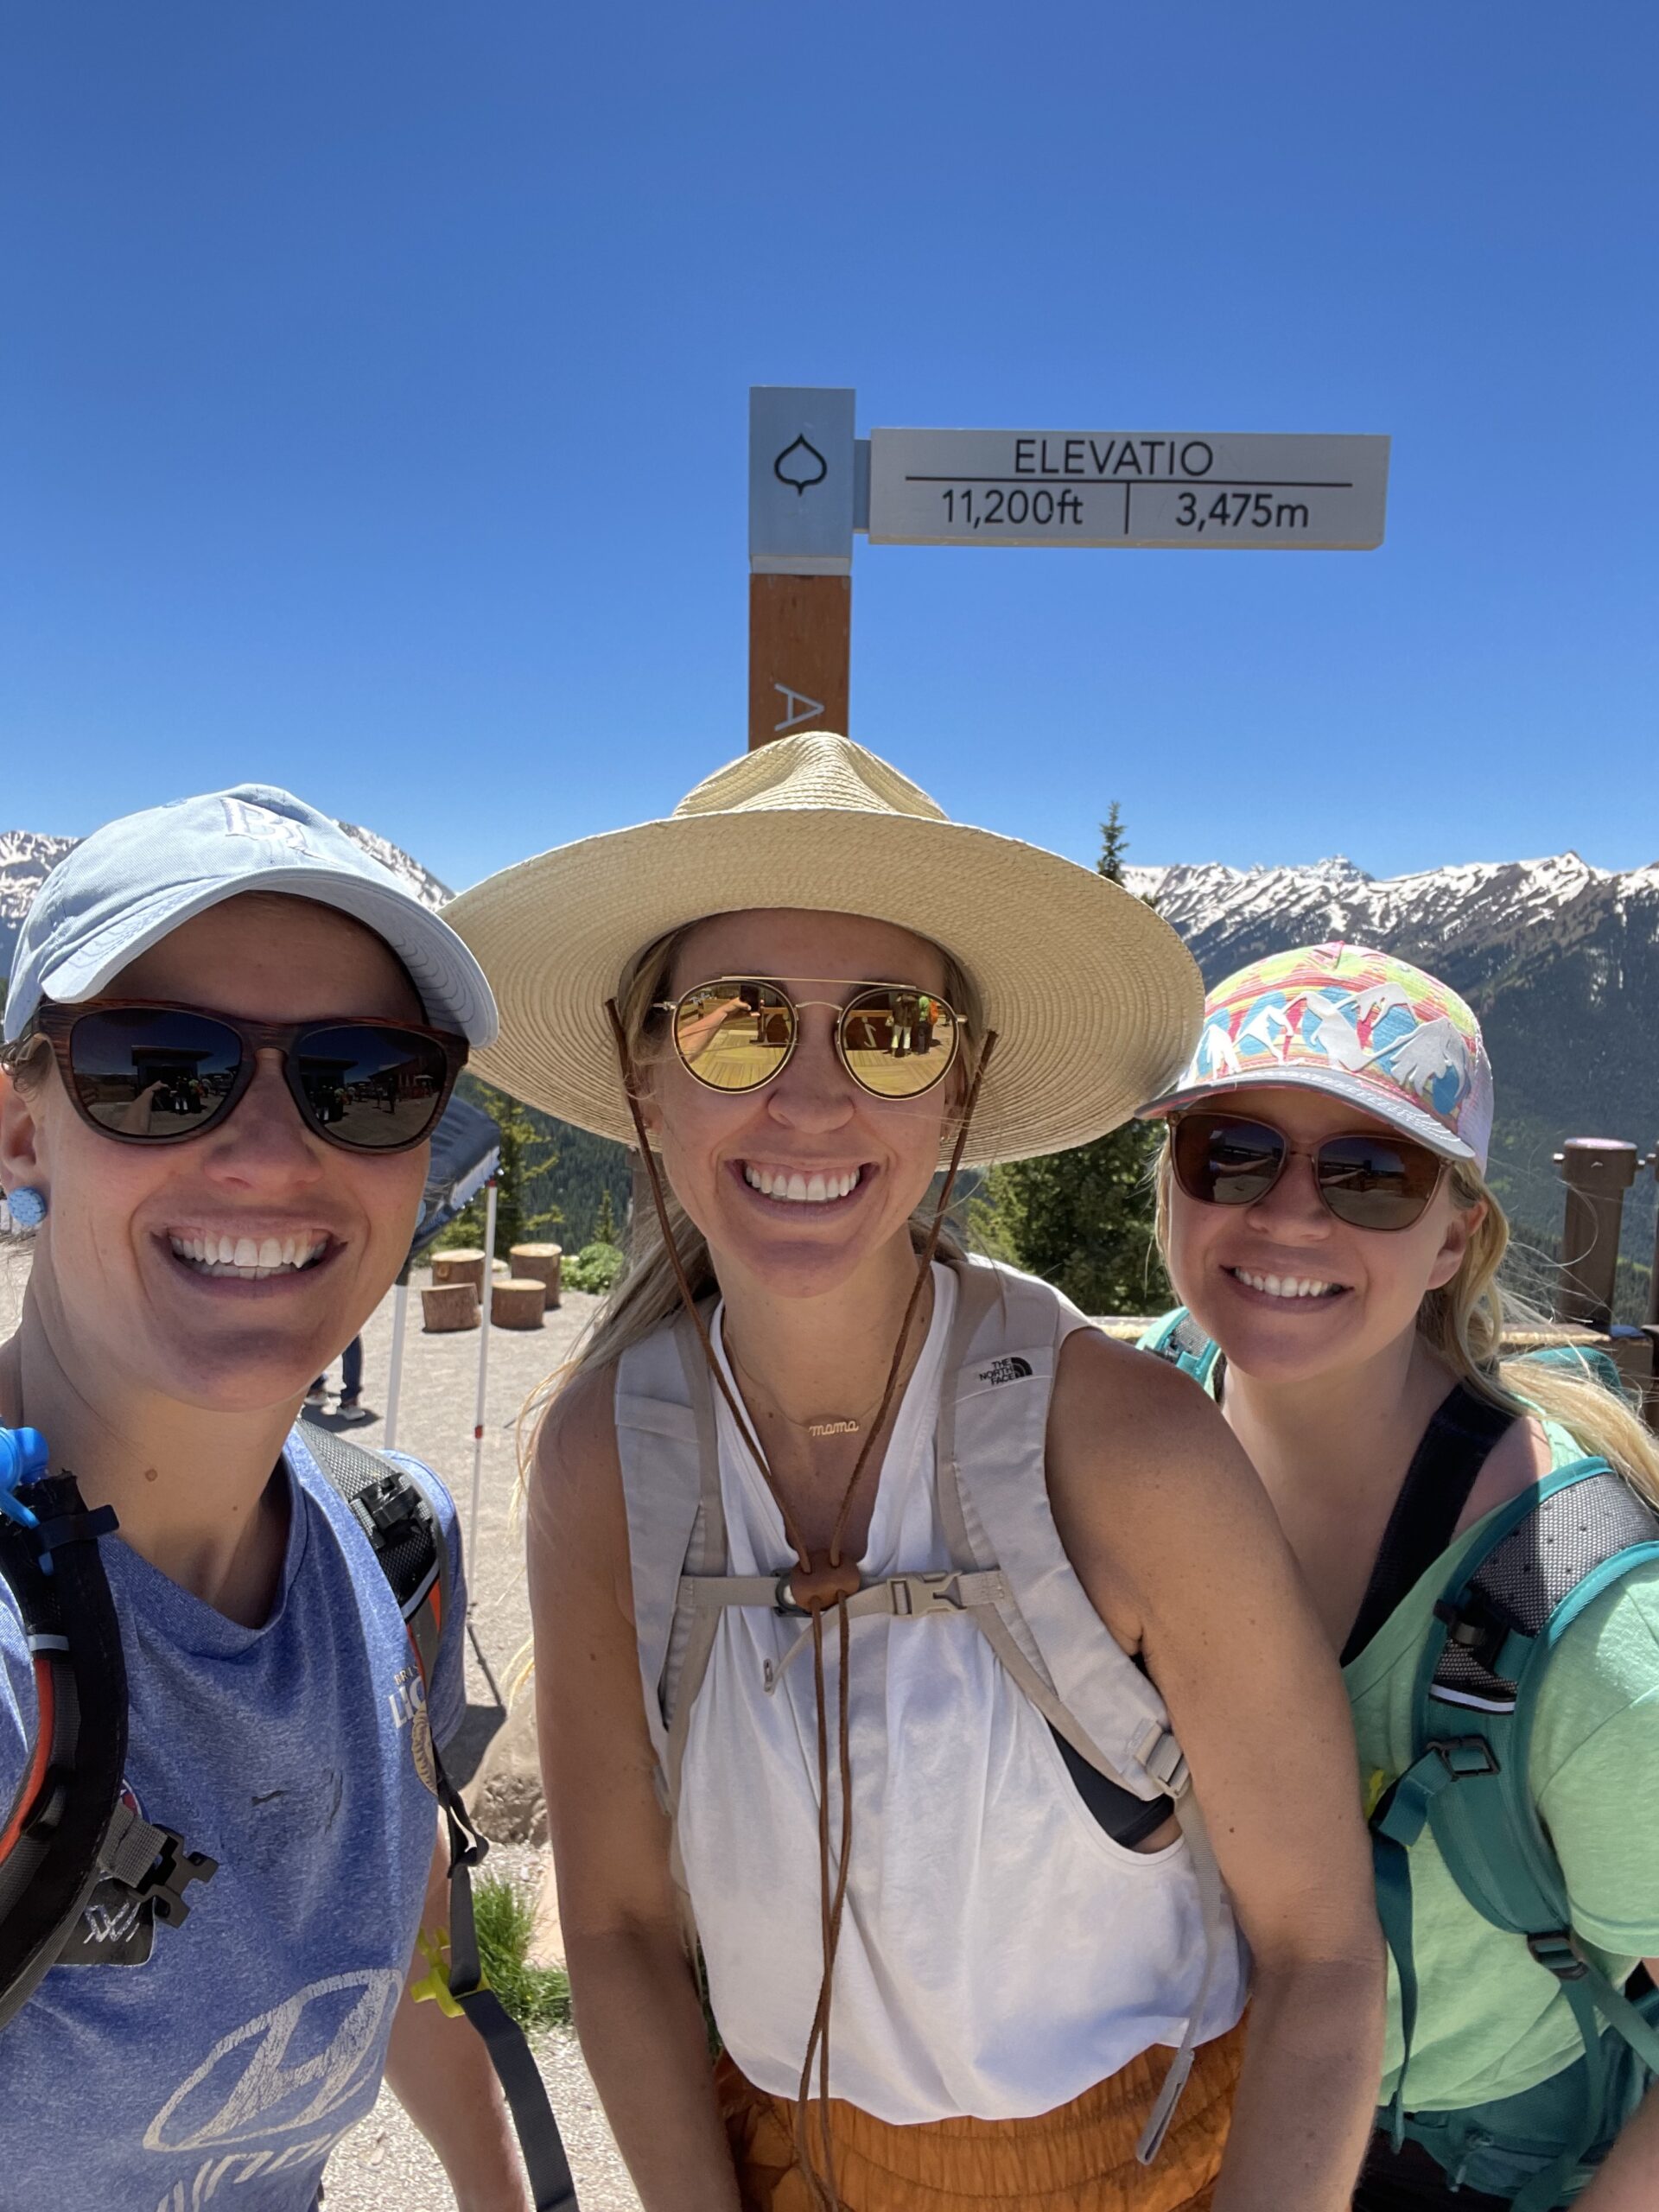 You can take the Silver Queen Gondola to the top, or for a challenge, you can hike it! #aspenmountain #visitcolorado #girlswhohike